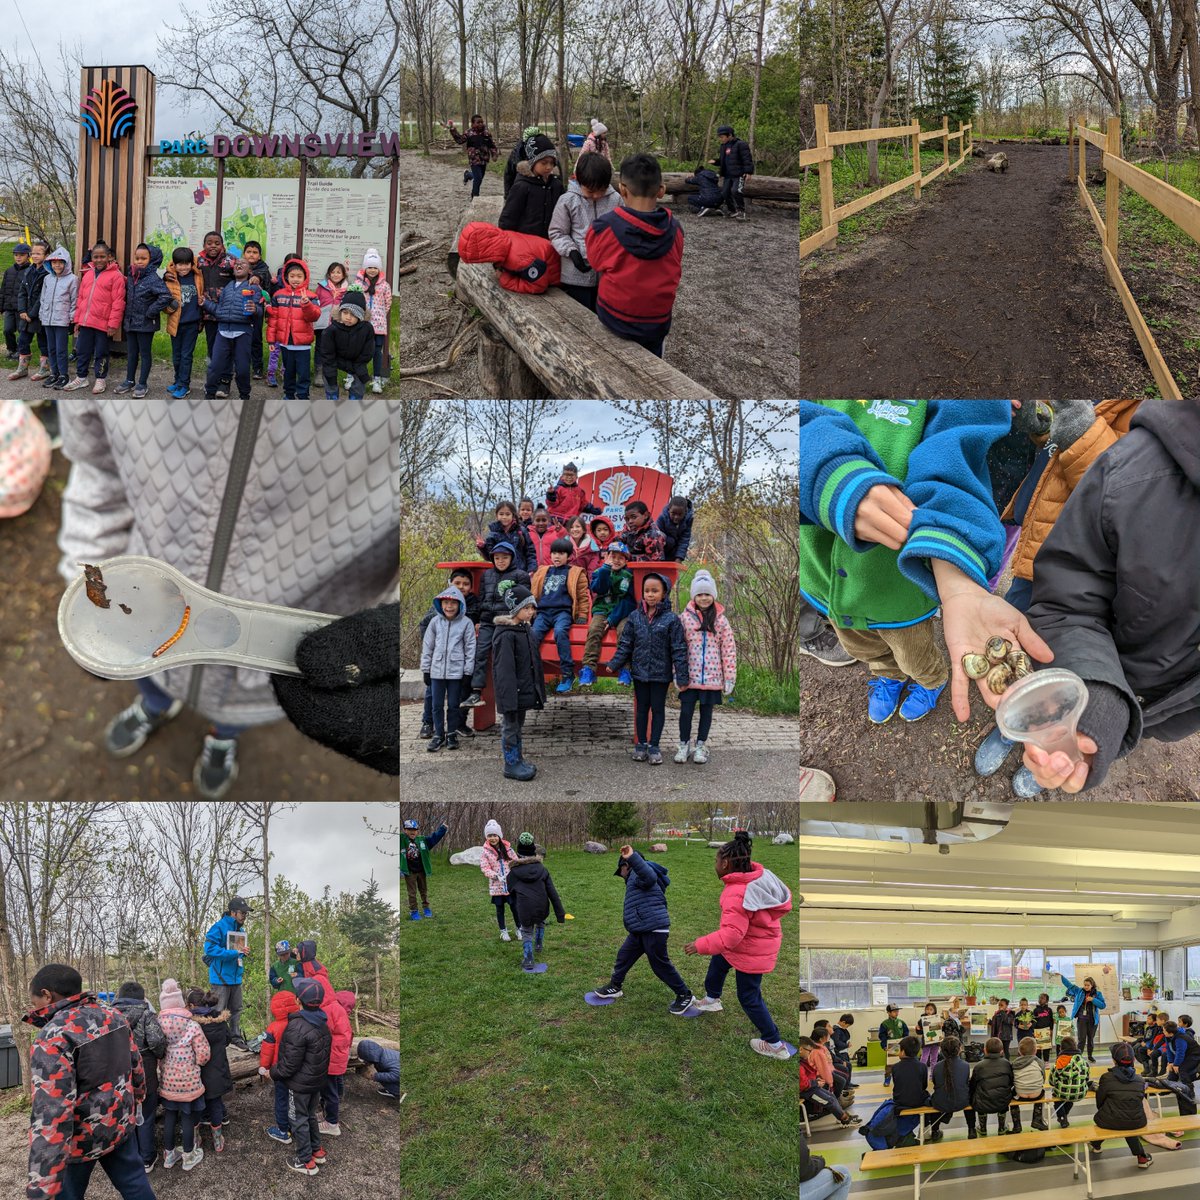 We had so much fun being detectives in nature and exploring the great outdoors today at Downsview Park! @stjeromestcdsb @vince_stellato @MrsTullio